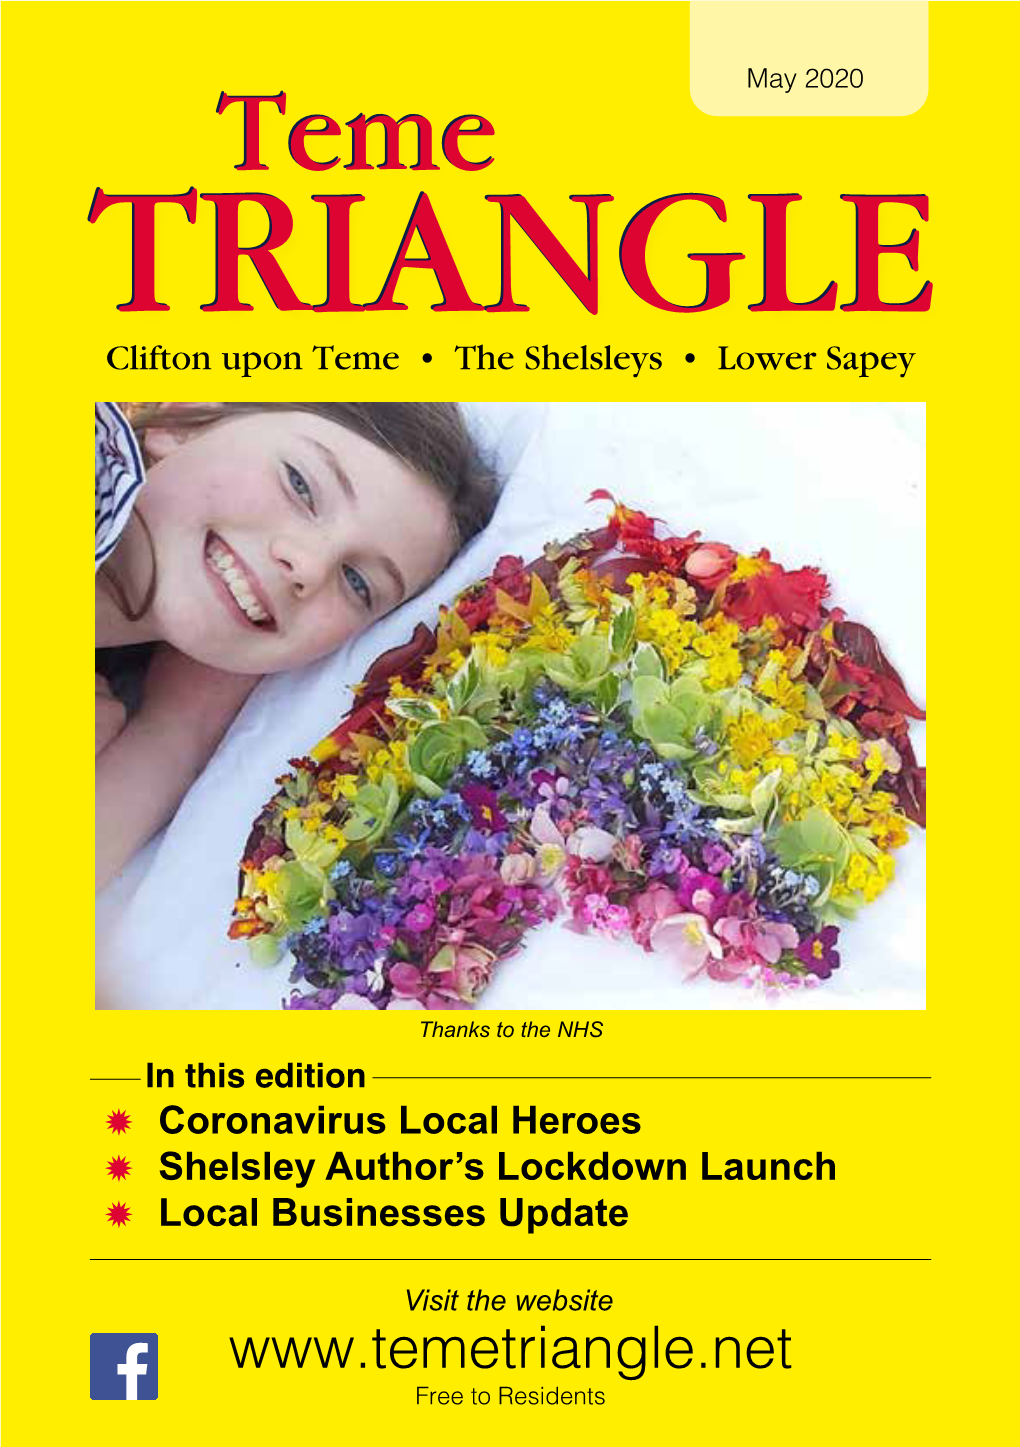 May 2020 TRIANGLETRIANGLE Clifton Upon Teme • the Shelsleys • Lower Sapey